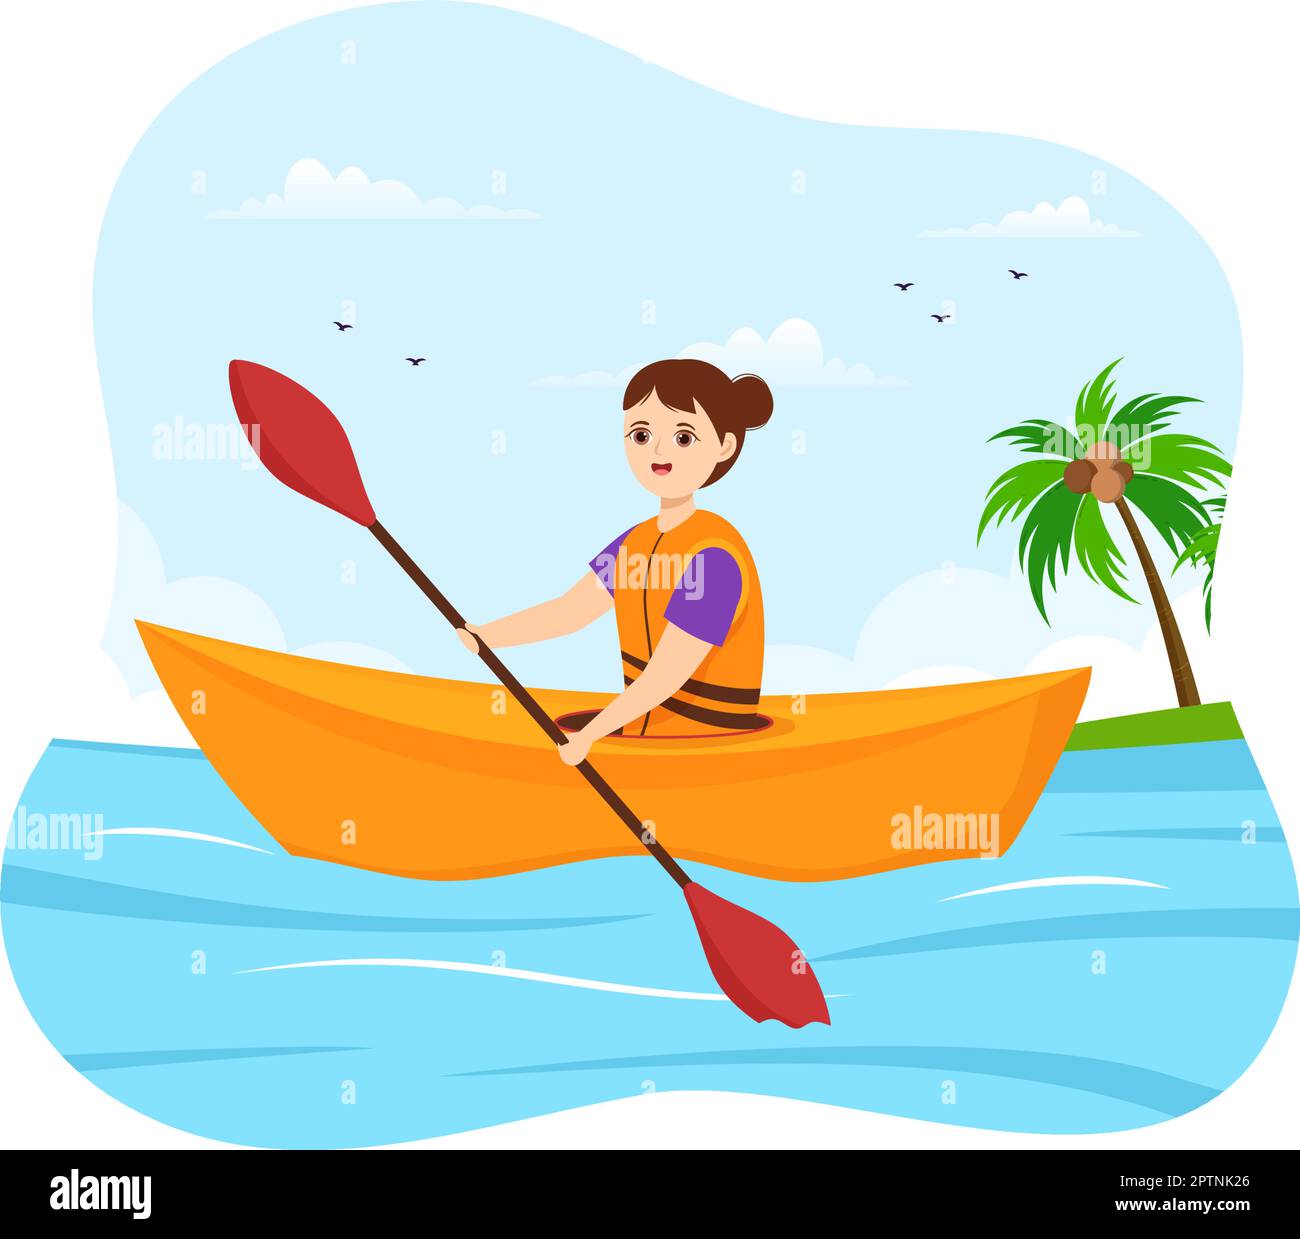 People Enjoying Rowing Illustration with Canoe and Sailing on River or Lake  in Active Water Sports Flat Cartoon Hand Drawn Template Stock Vector